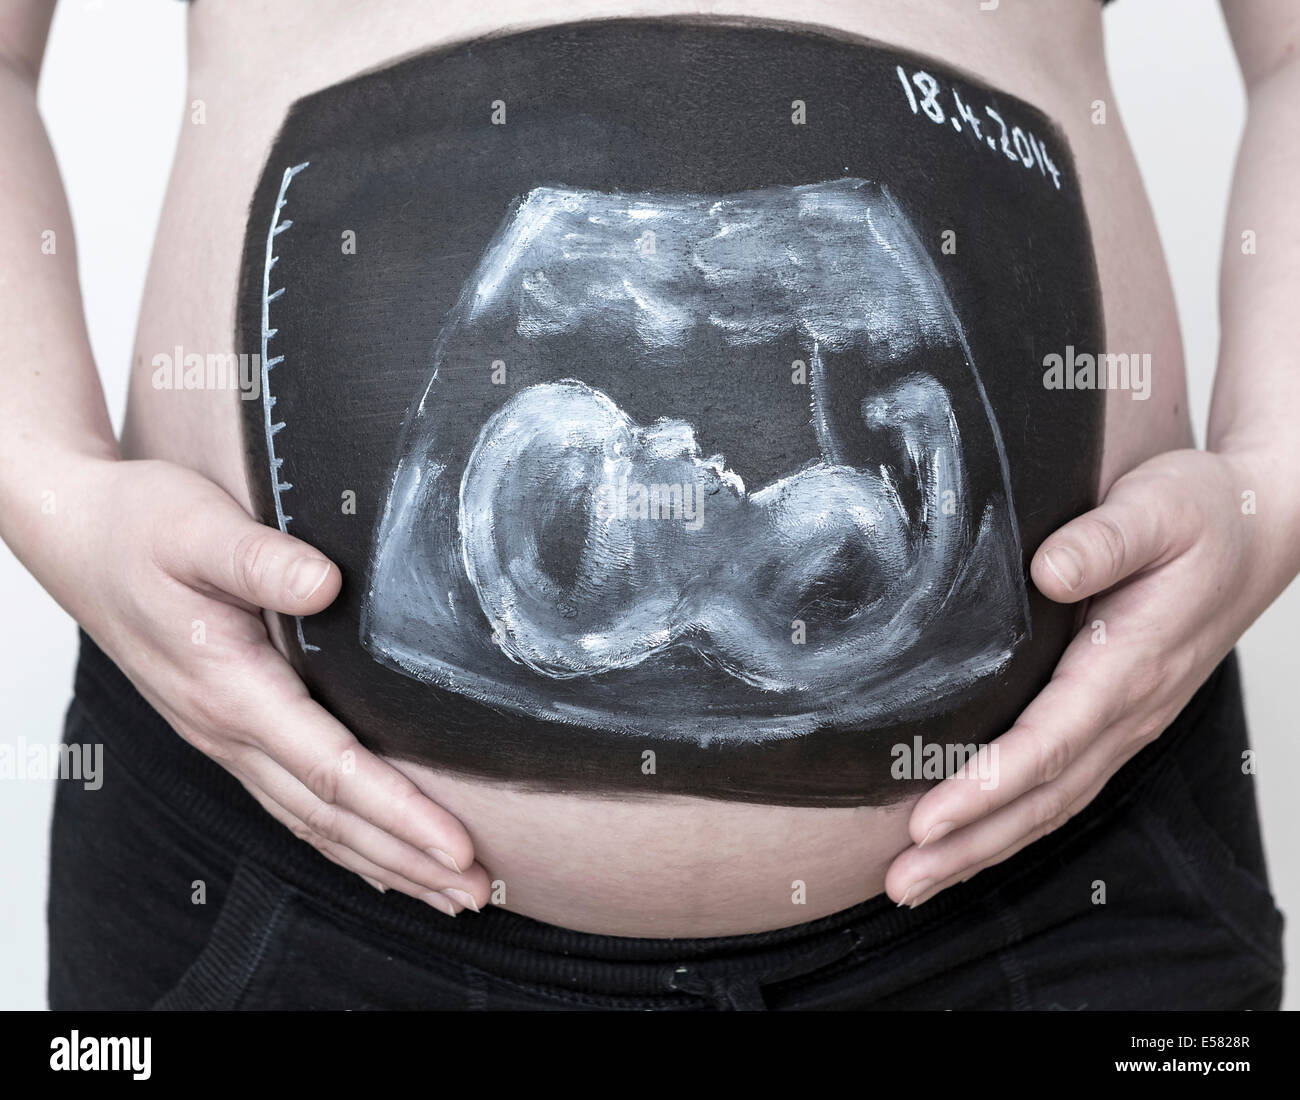 Pregnant woman with a body paint of an ultrasound image on her belly Stock Photo